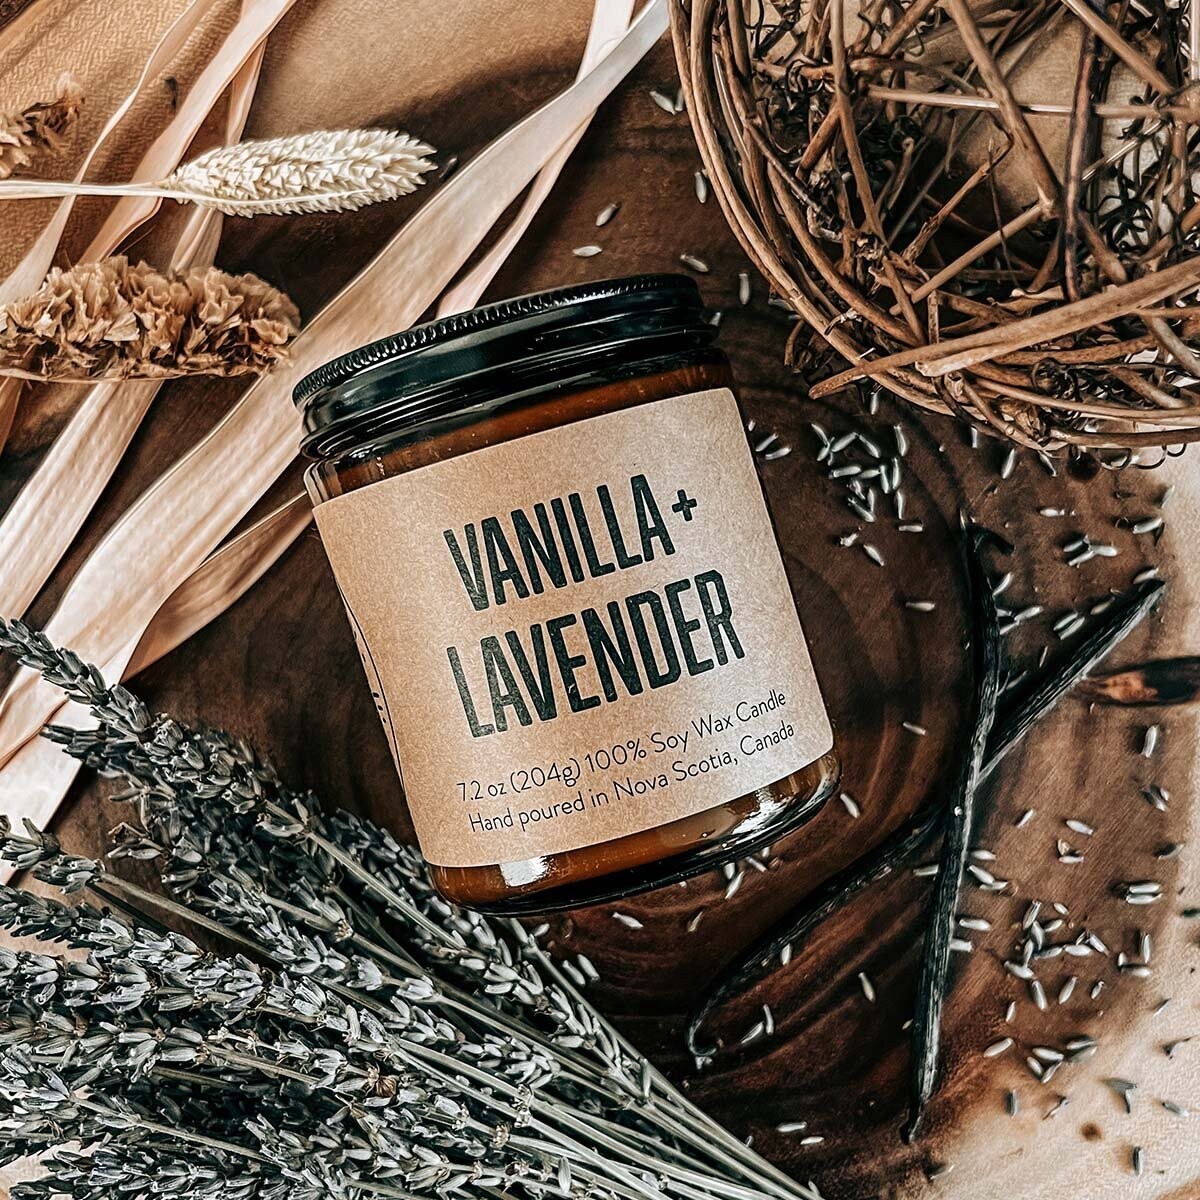 Lavender and Vanilla - Lawrencetown Candle Co